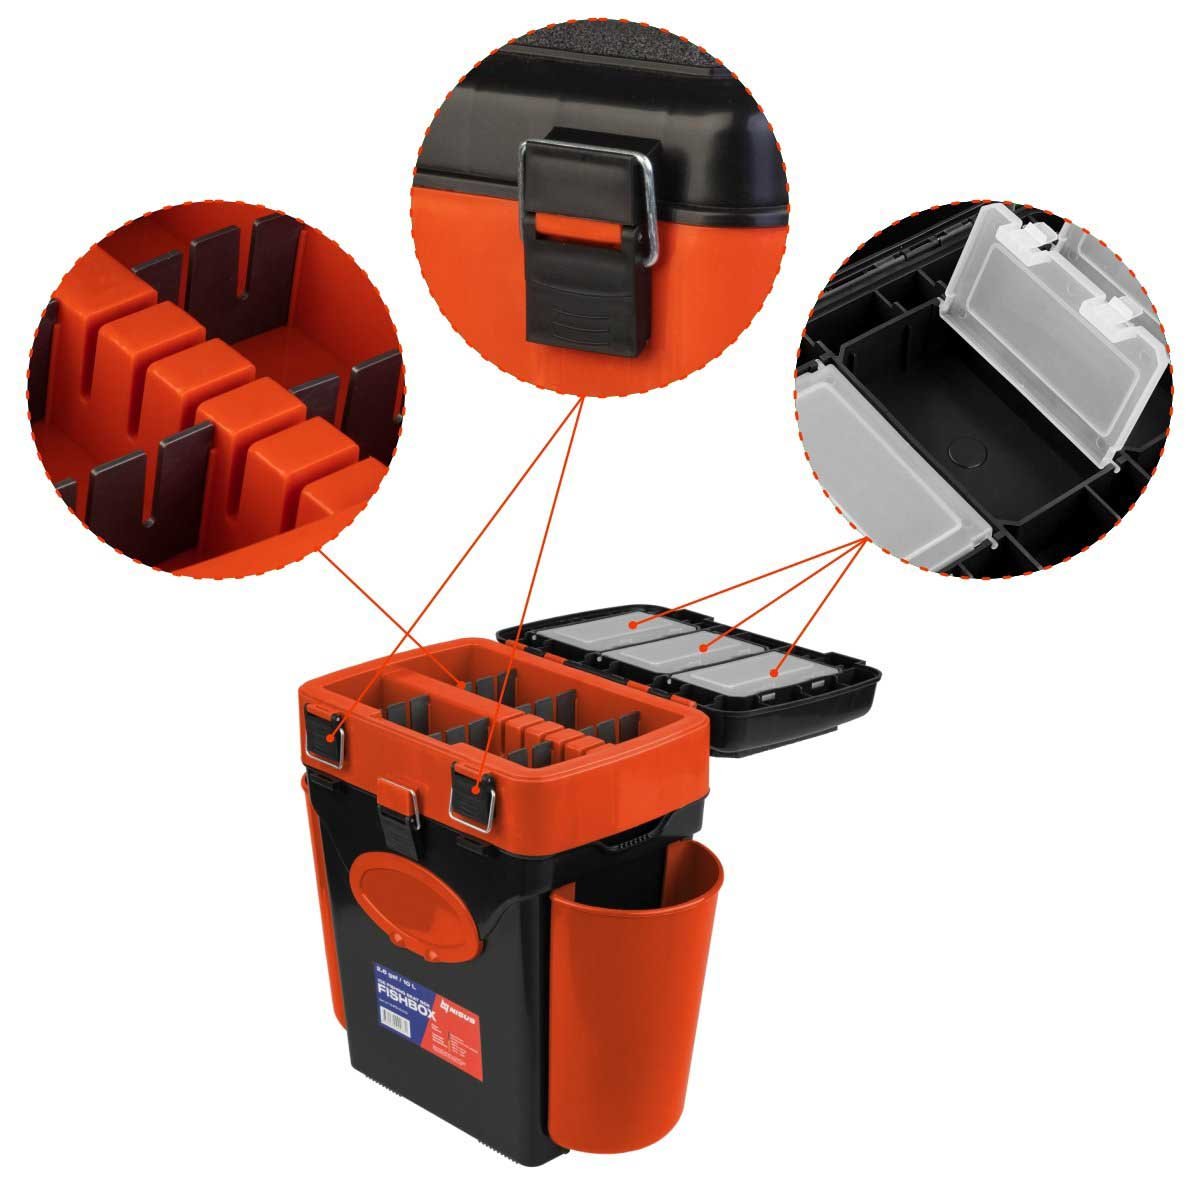 FishBox 10 liter Box for Ice Fishing is equipped with plastic diveders and 3 plastic boxes for handy storage.